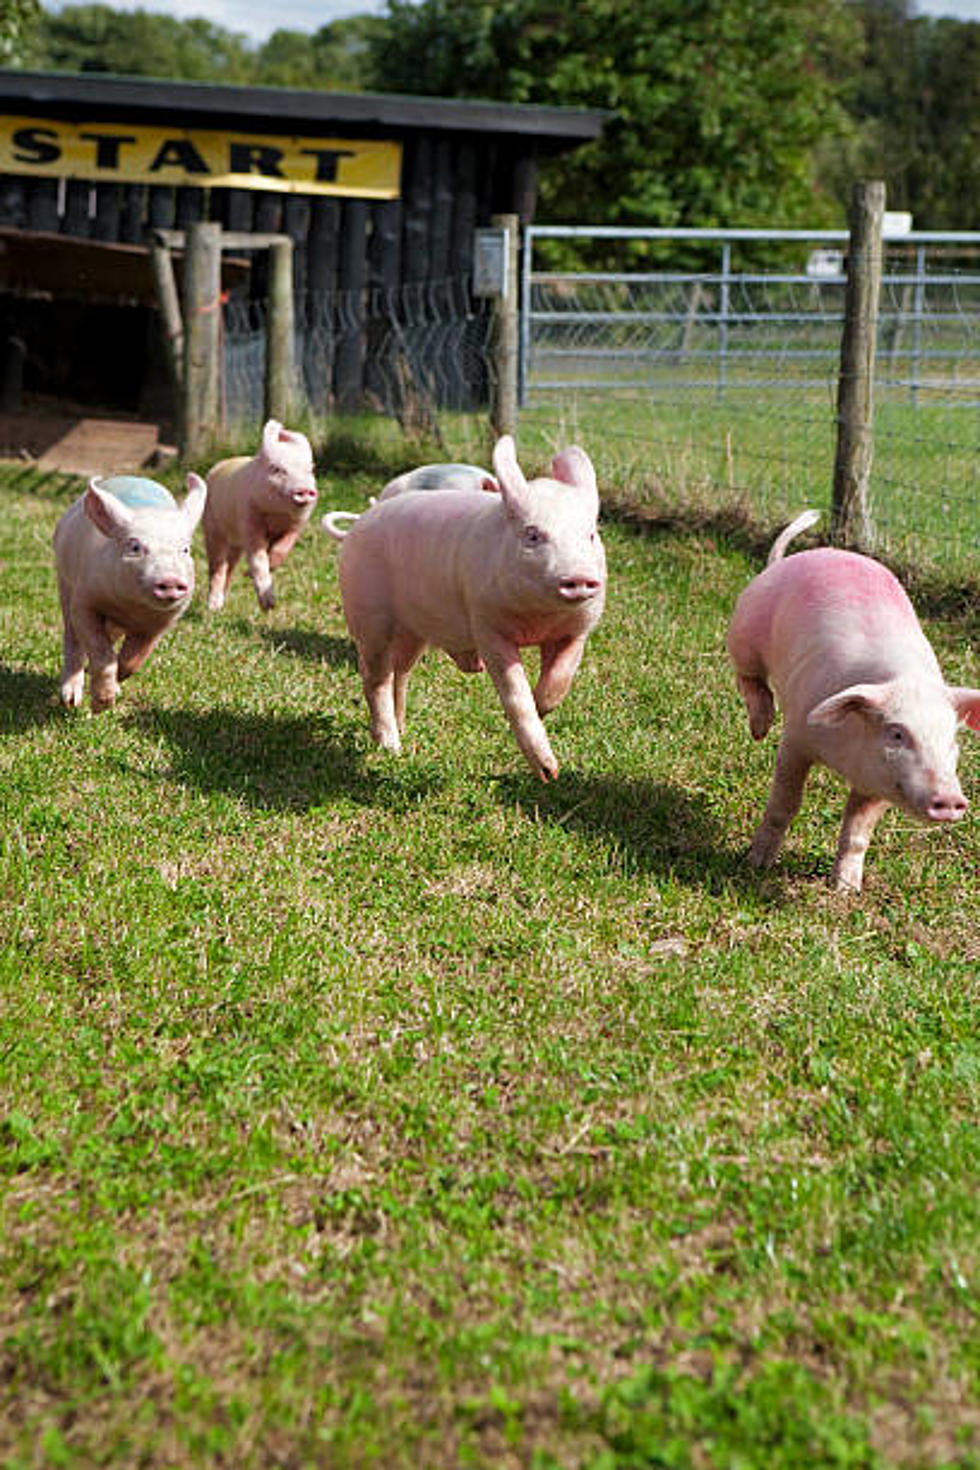 Miss Piggy’s Great Escape: A Fun-filled Tale From Slidell, Louisiana